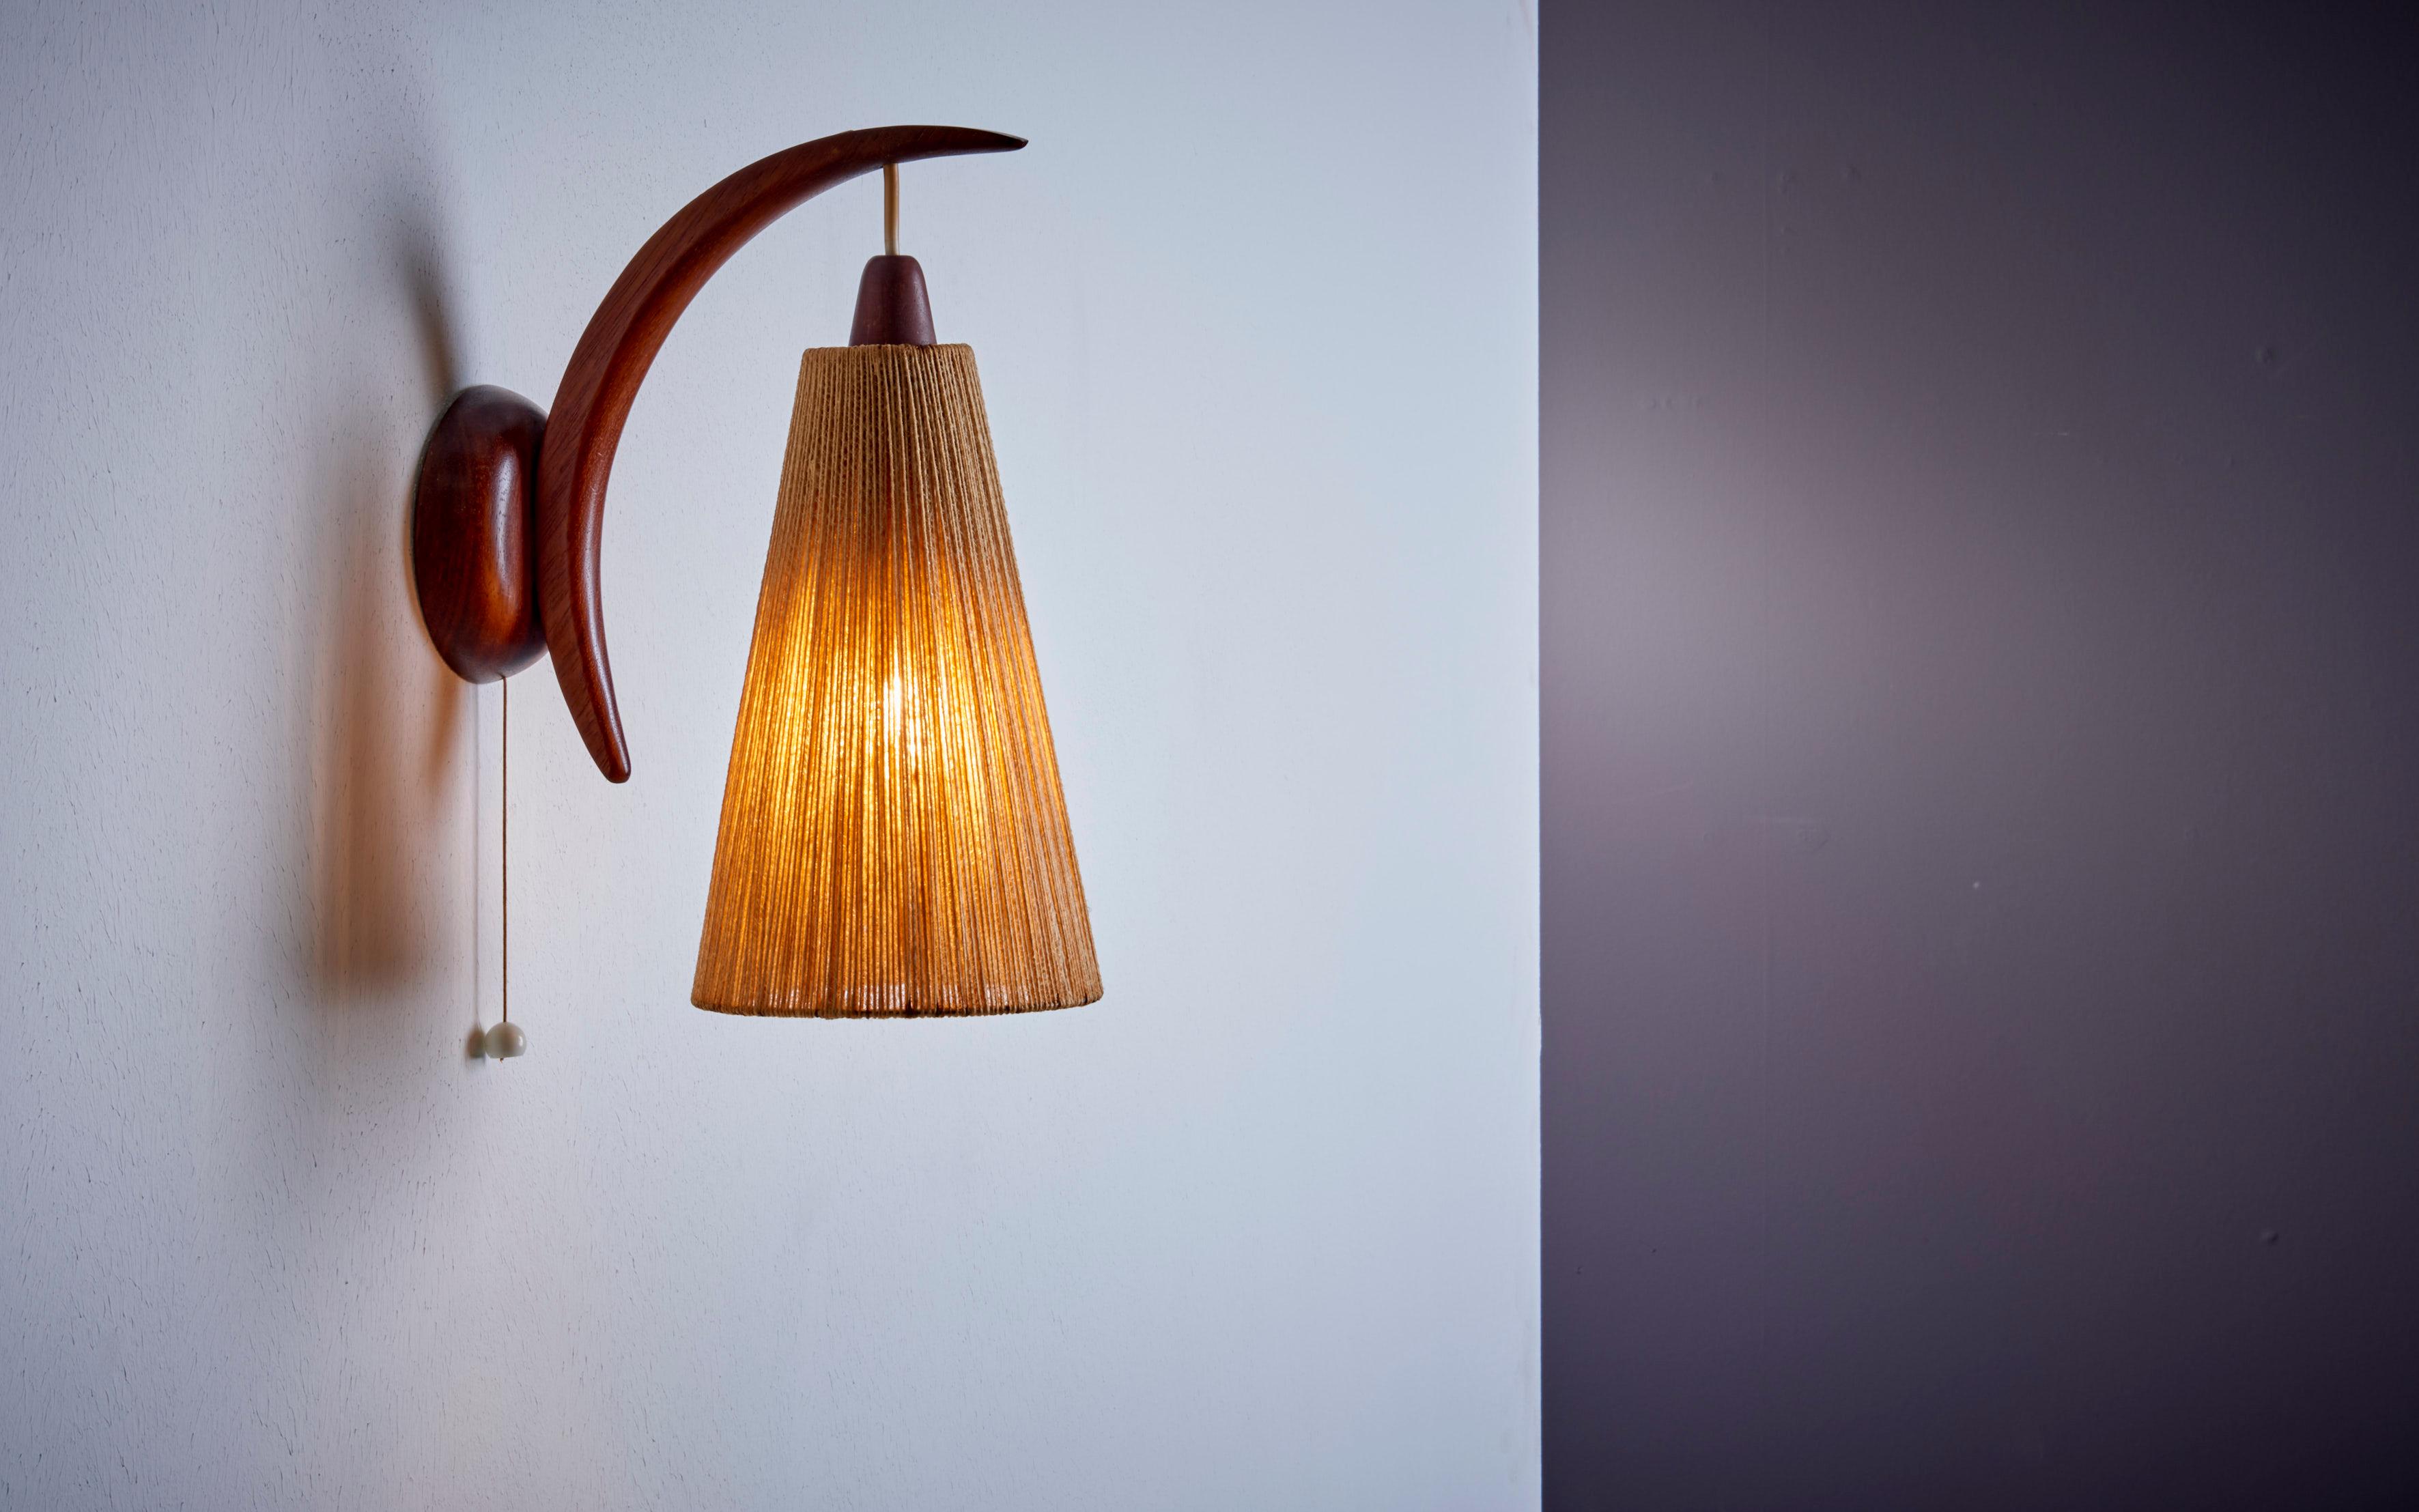 Swiss Wall Lamp with Cord Shade by E.R. Nele for Temde, Switzerland